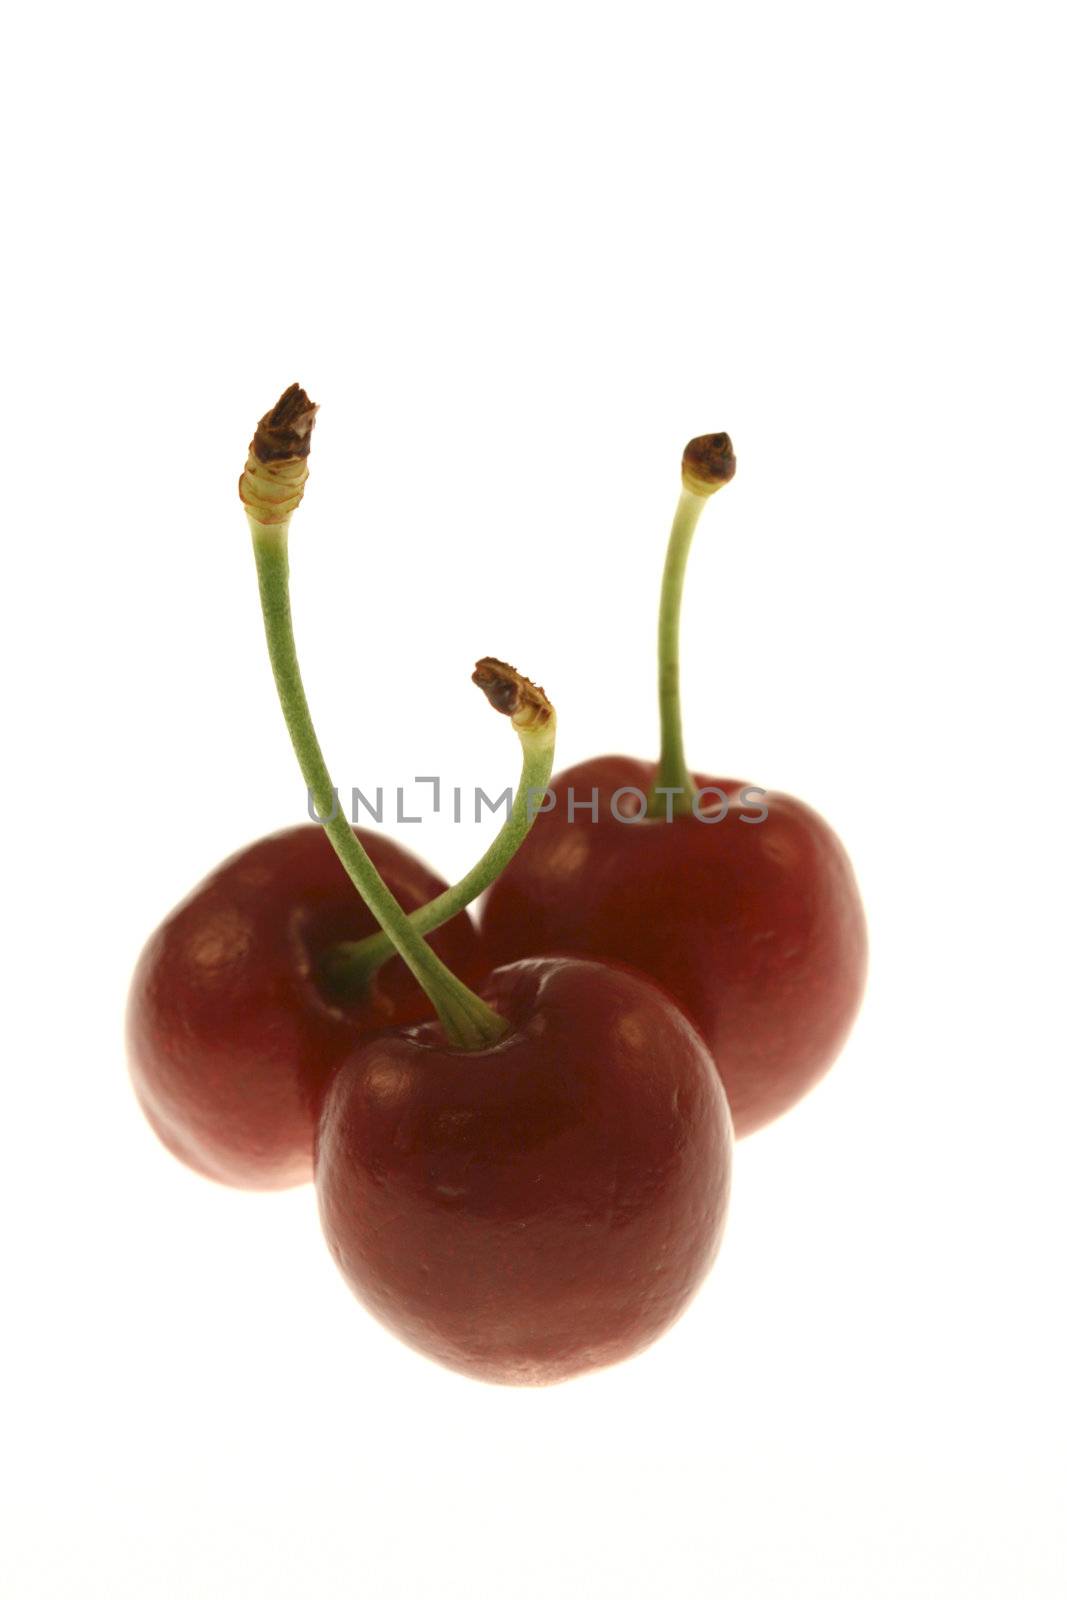 Three cherries isolated on a white background